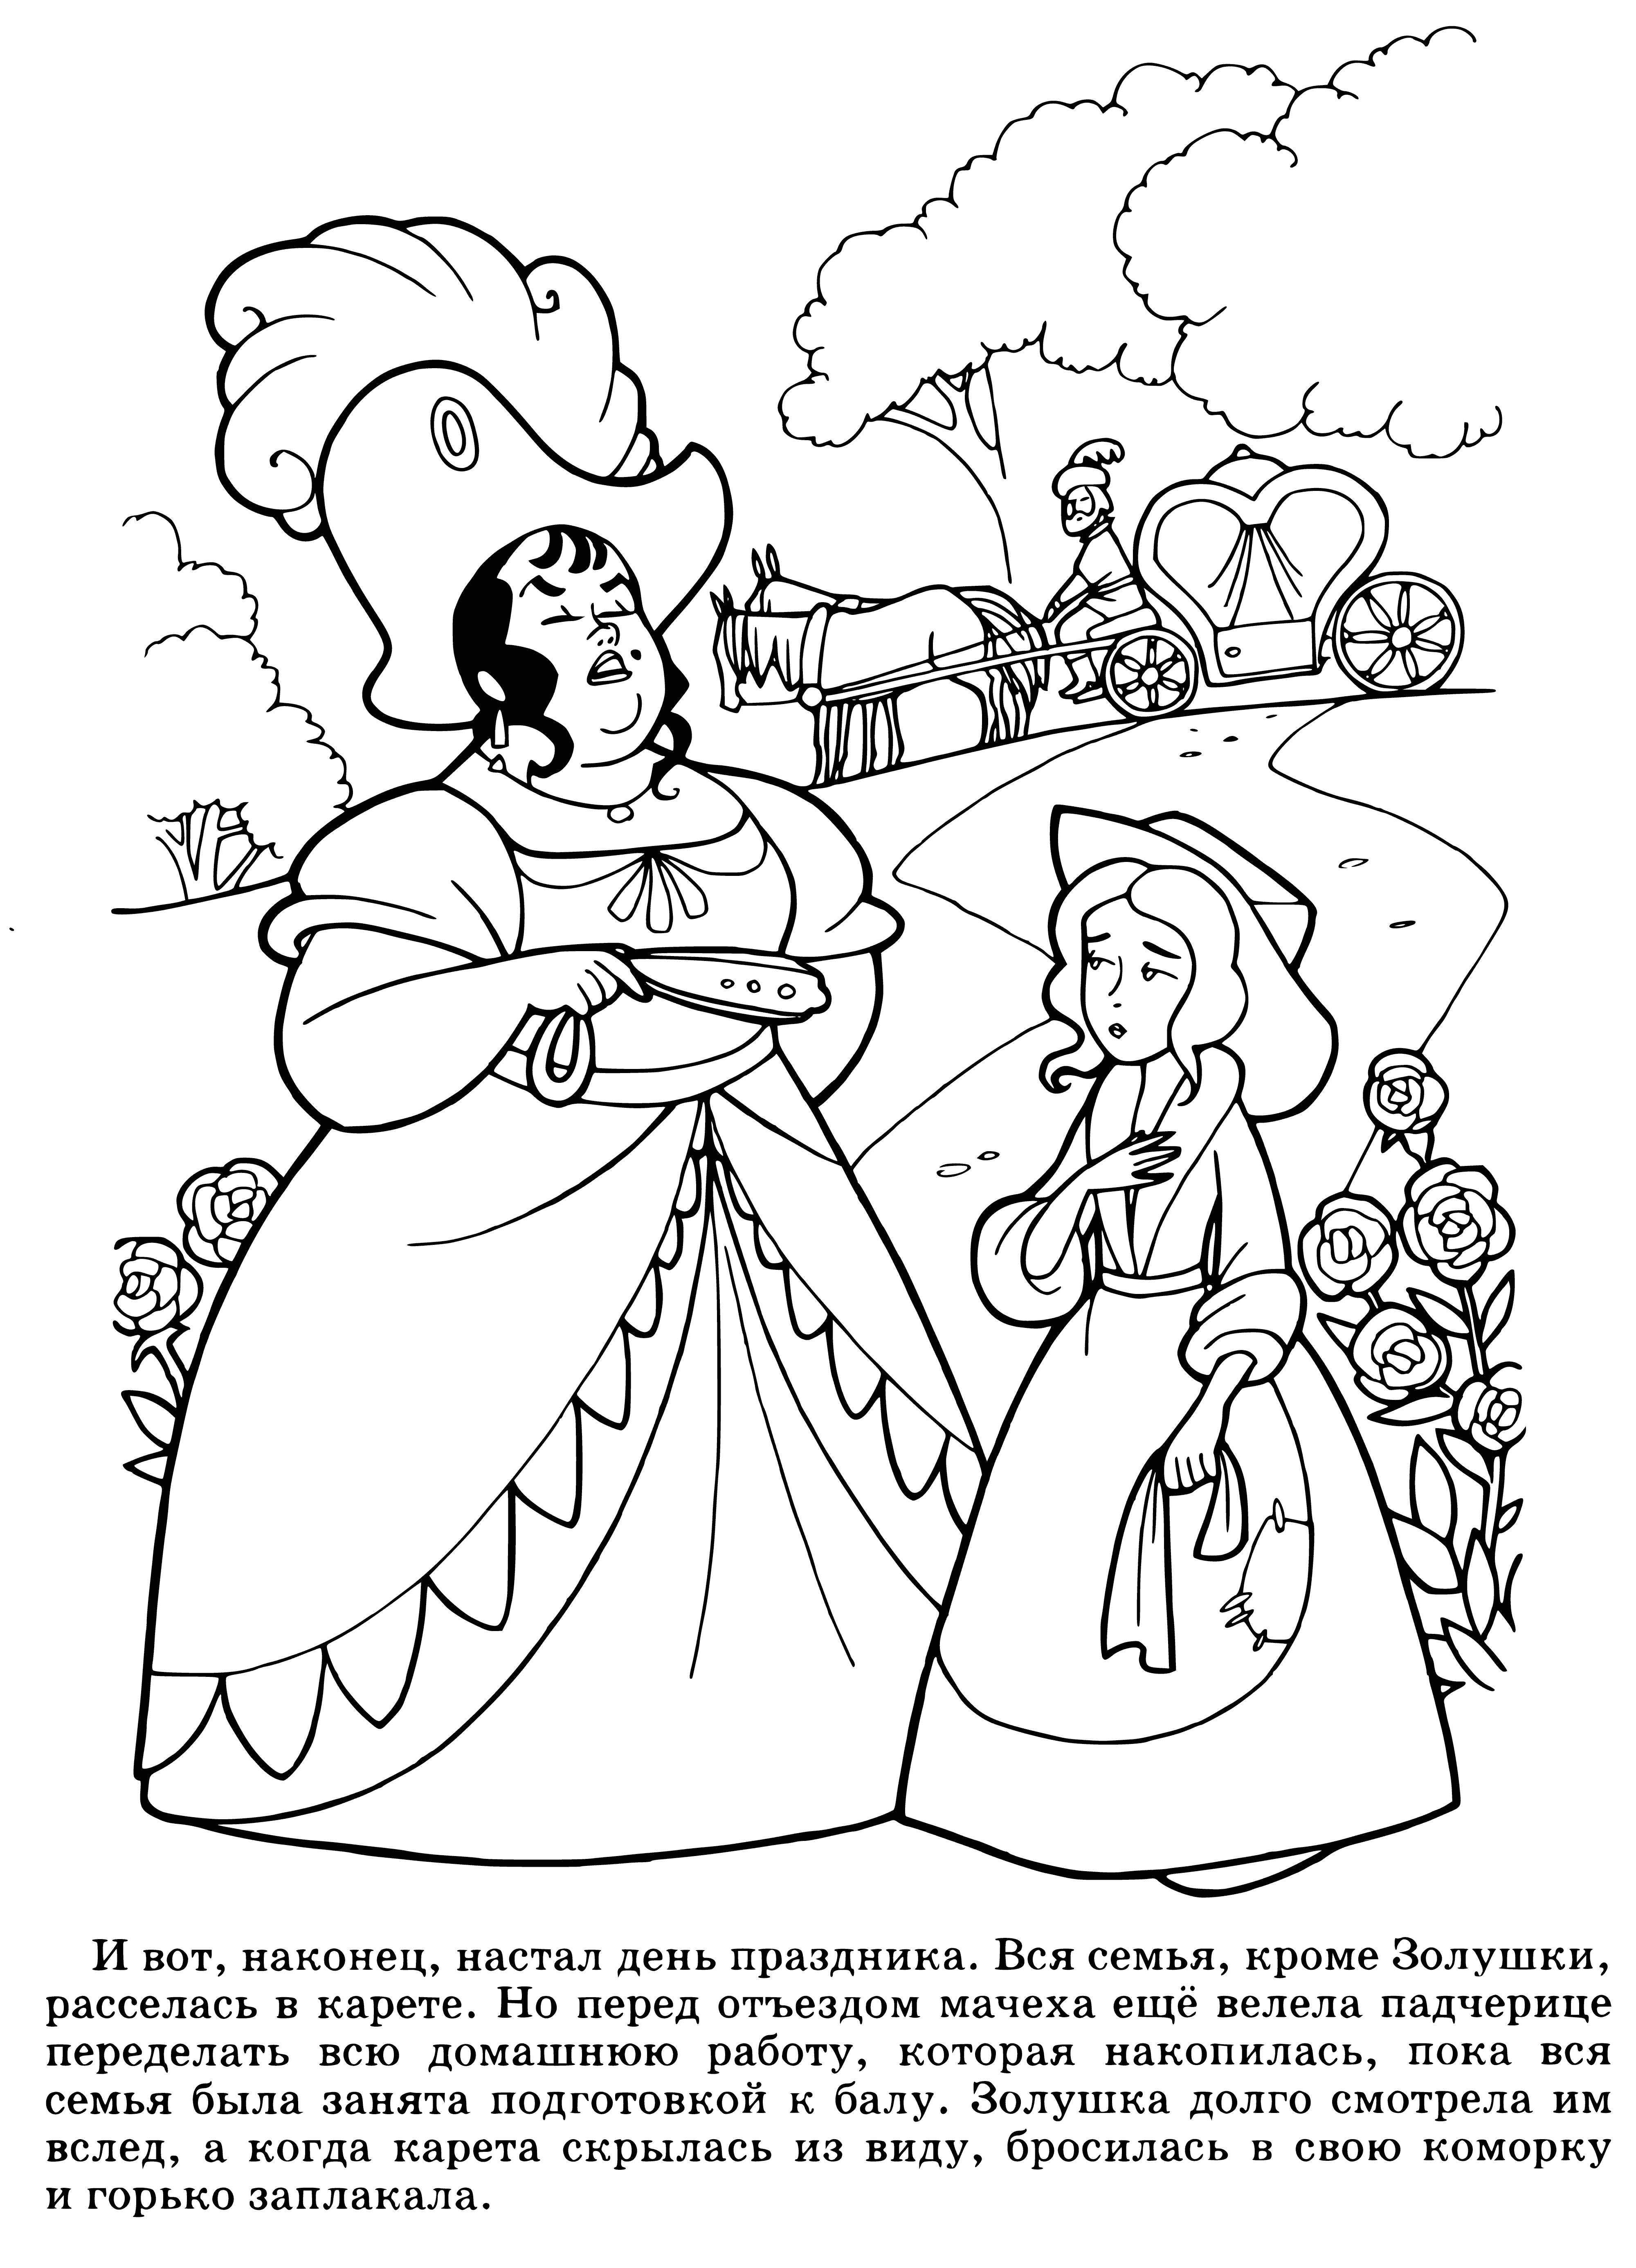 coloring page: Two women and a baby in a room with a fireplace and tea set, chatting. #FairyTales #Perrault